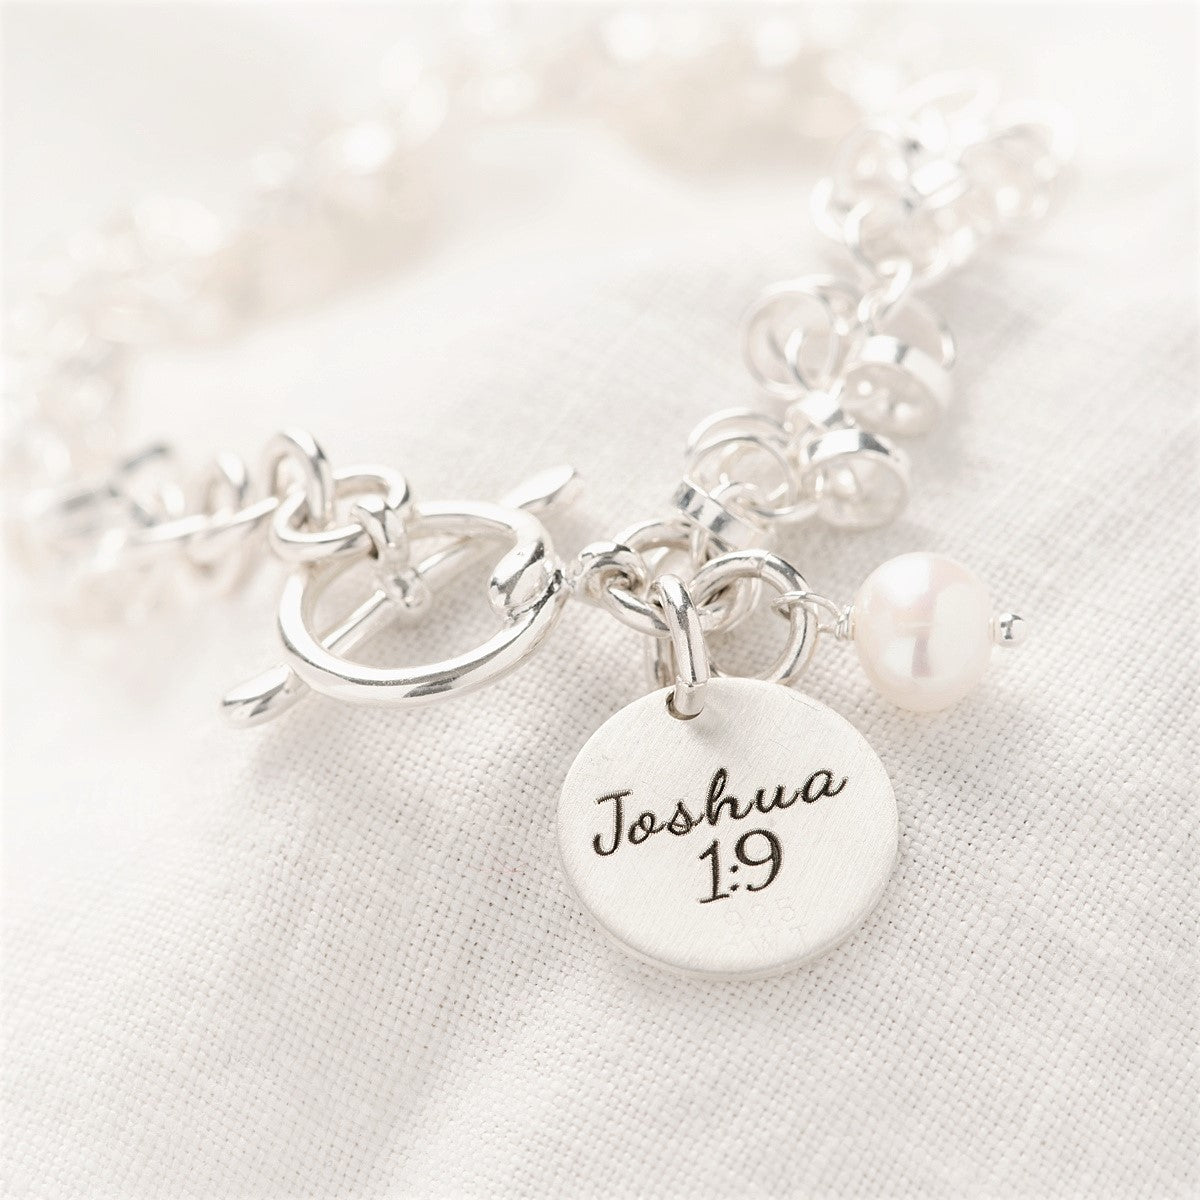 925 Solid Silver Toggle Heart Charm Bracelet Personalized 